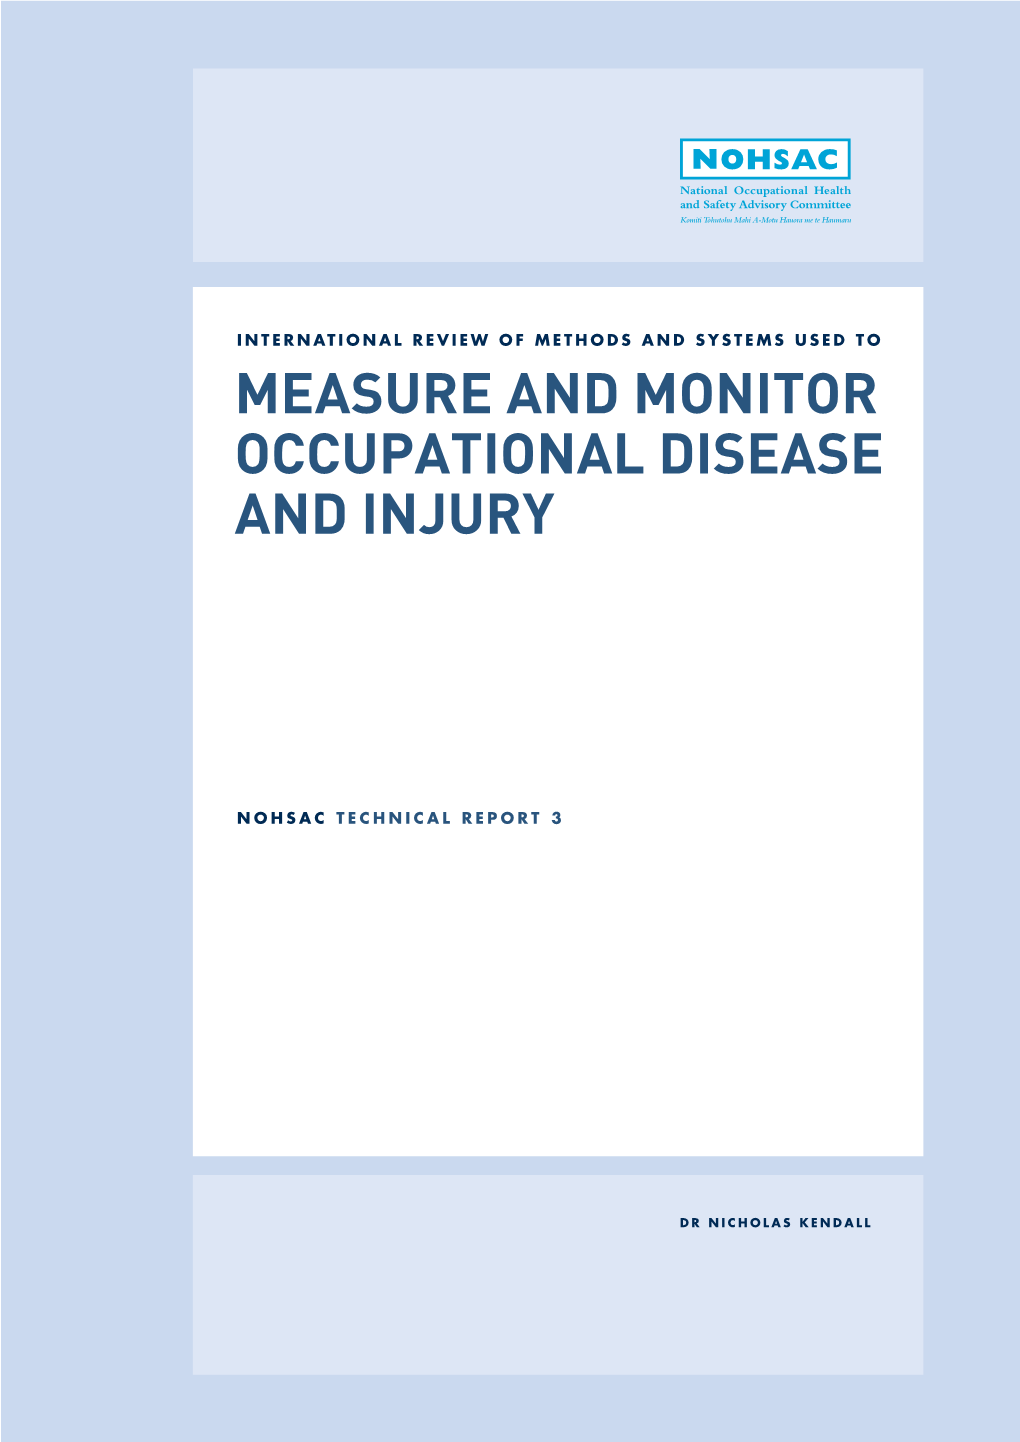 International Review of Methods and Systems Used to Measure and Monitor Occupational Disease and Injury